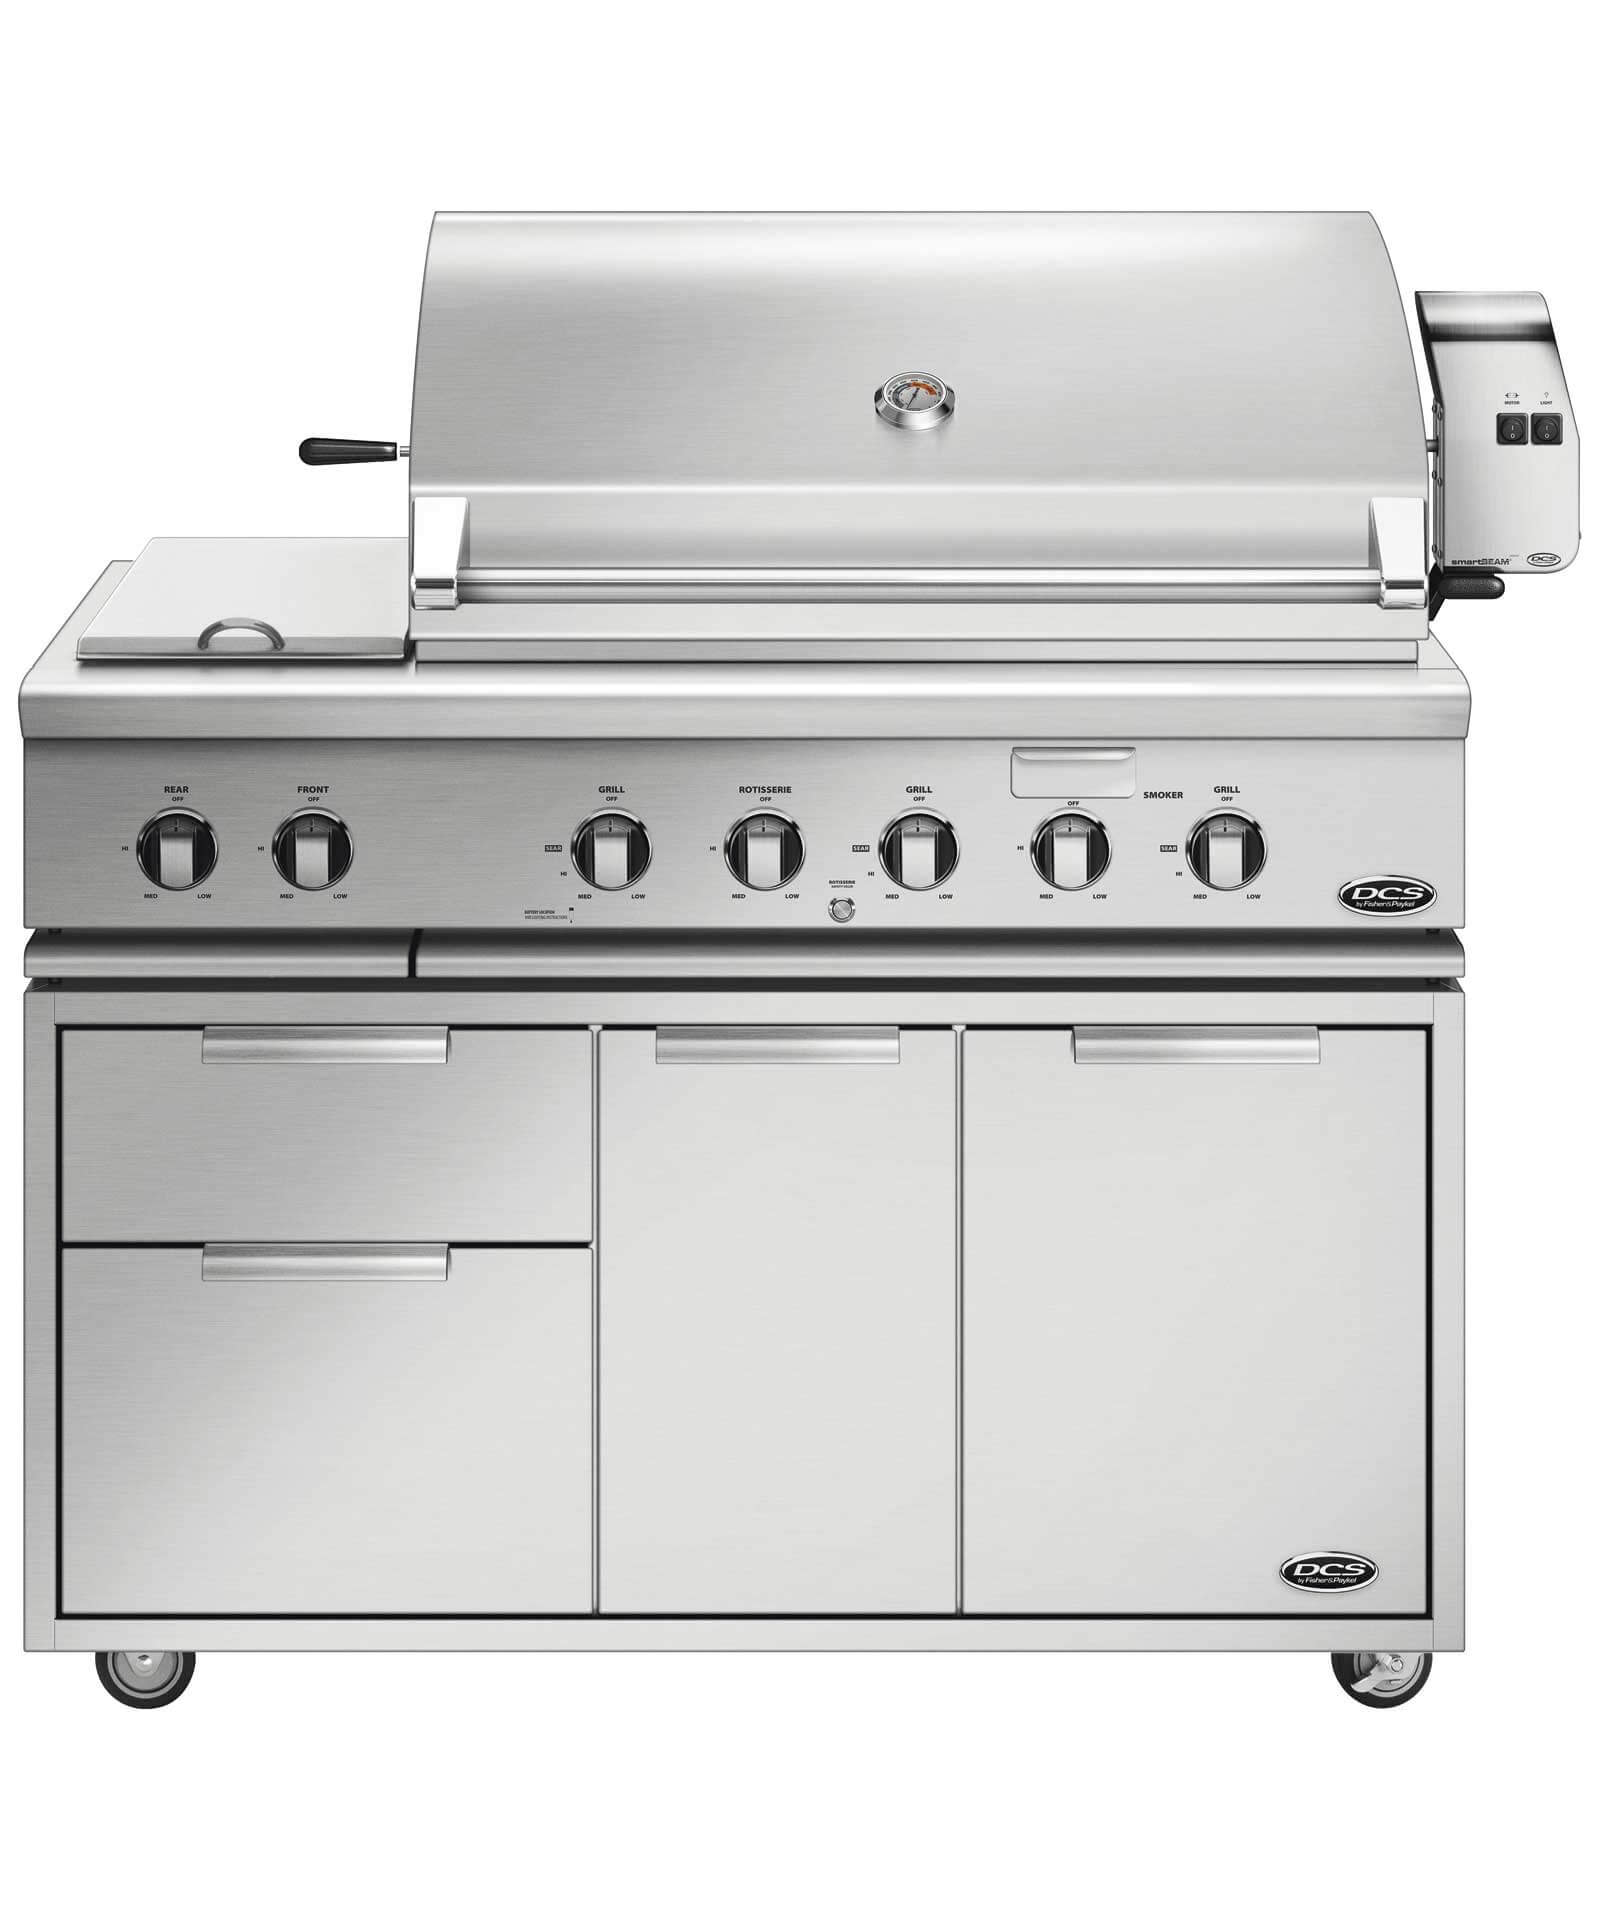 BH148RSL 48 Traditional Built-In Liquid Propane Grill with 3 Stainless Steel Burners 1 Smoker Tray Rotisserie 2 Side Burners 1115 sq. in. Cooking Surface and Drip Pan in Stainless Steel - image 2 of 2